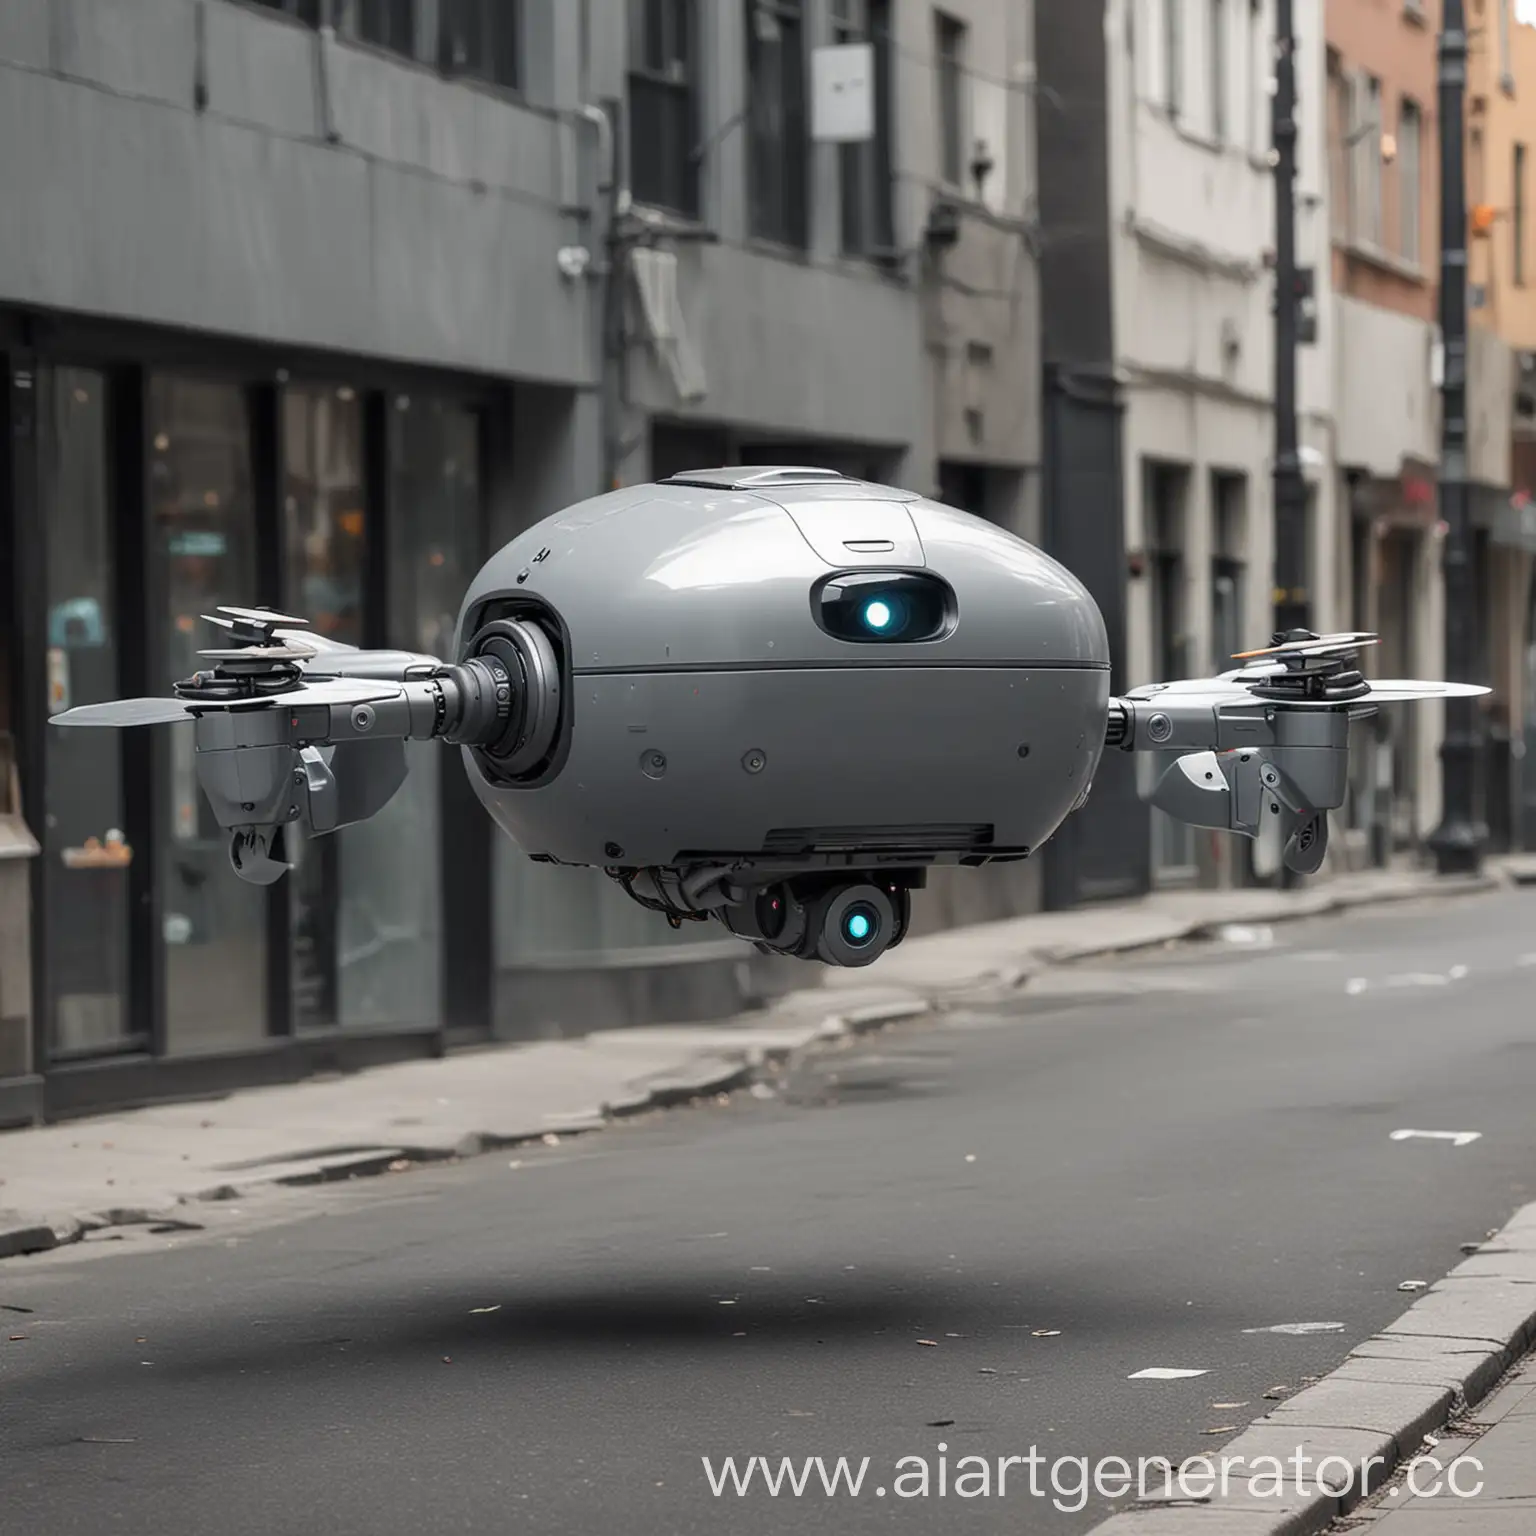 Urban-Scene-Gray-Round-Robot-Delivering-Food-on-the-Street